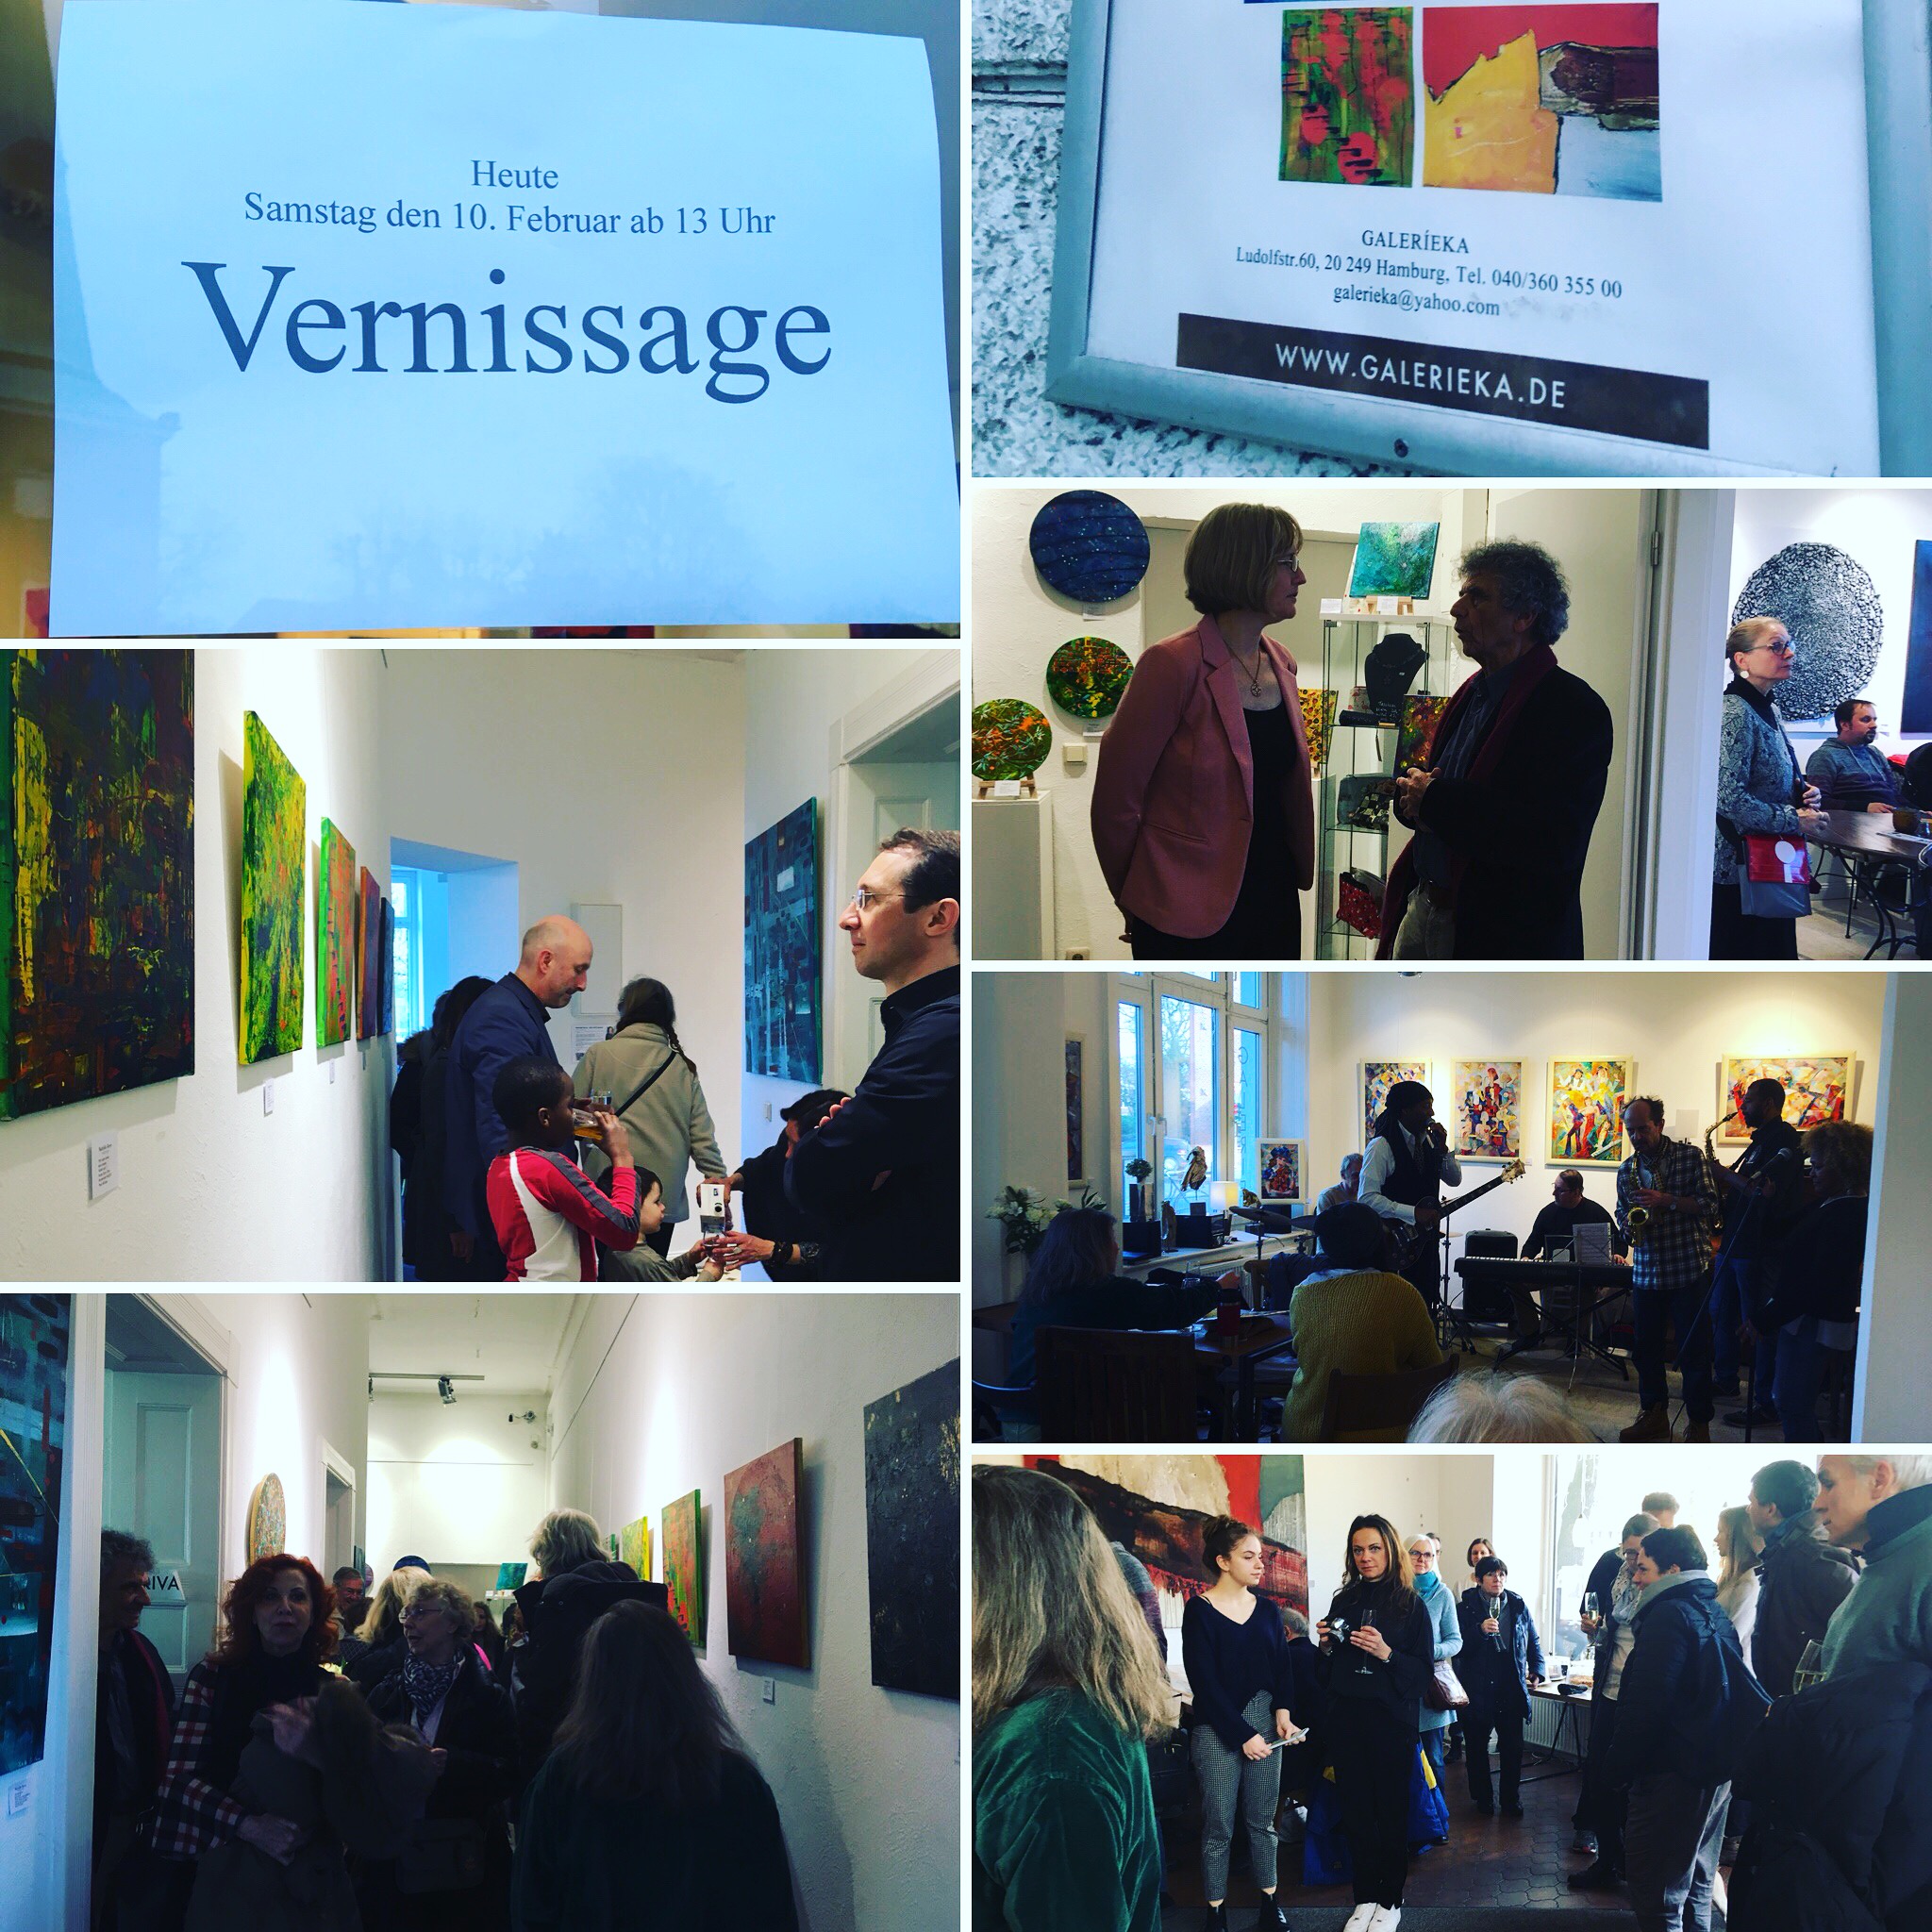 Vernissage of my second group exhibition at GALERÍEKA